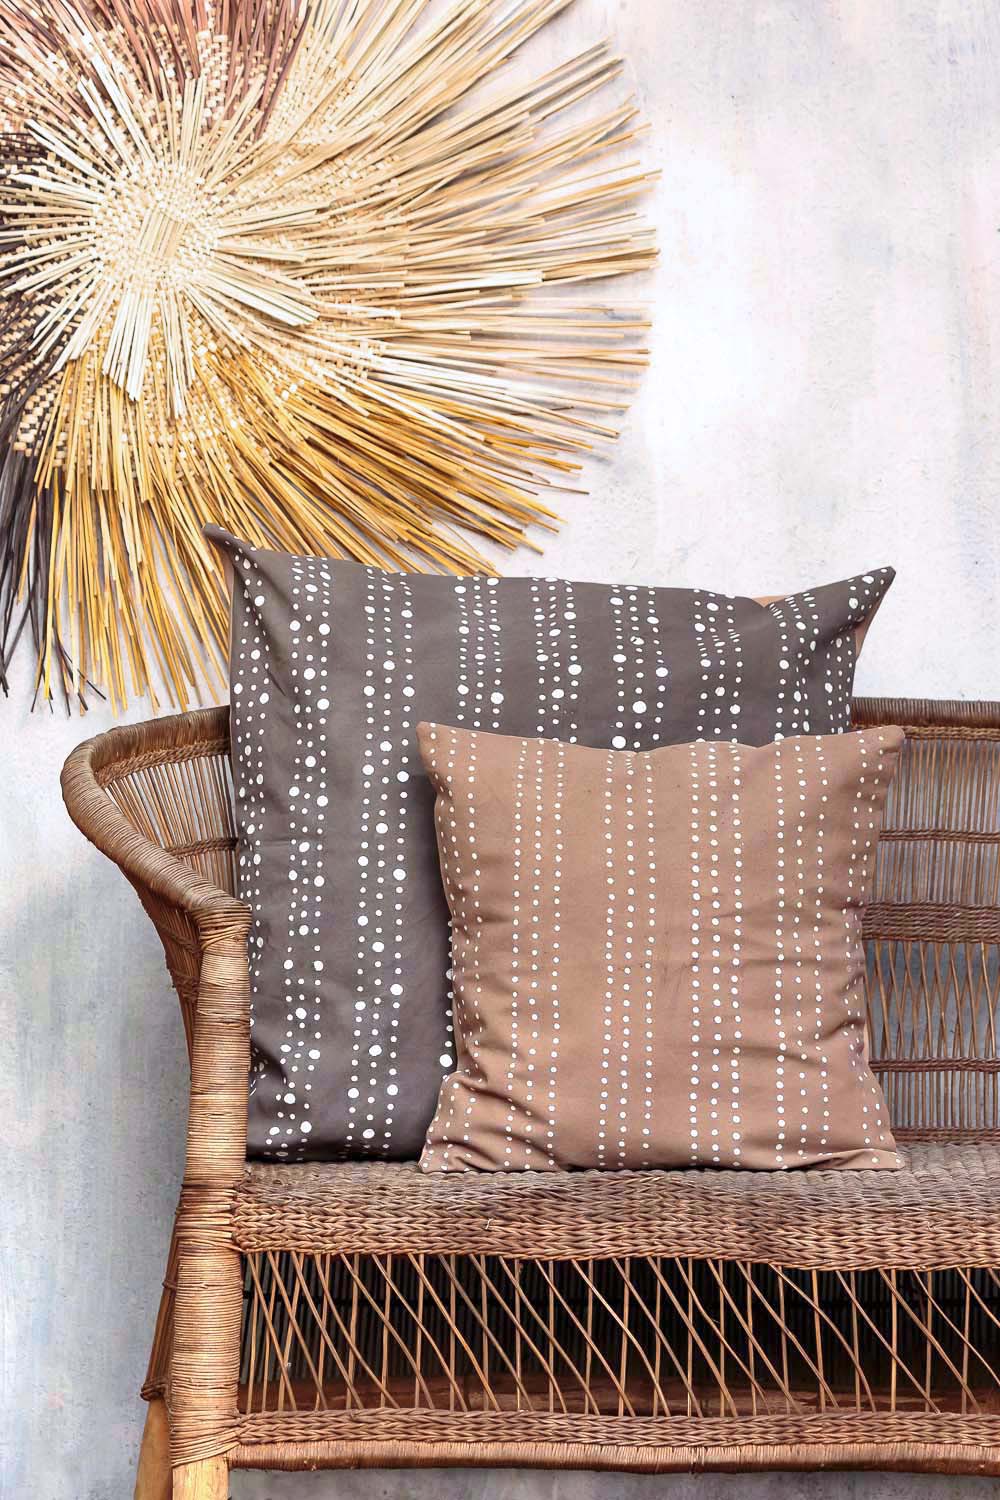 Tribal Cloth charcoal Graduated Dots Cushion Cover, Hand Painted by TRIBAL TEXTILES, Handcrafted Home Decor Interiors